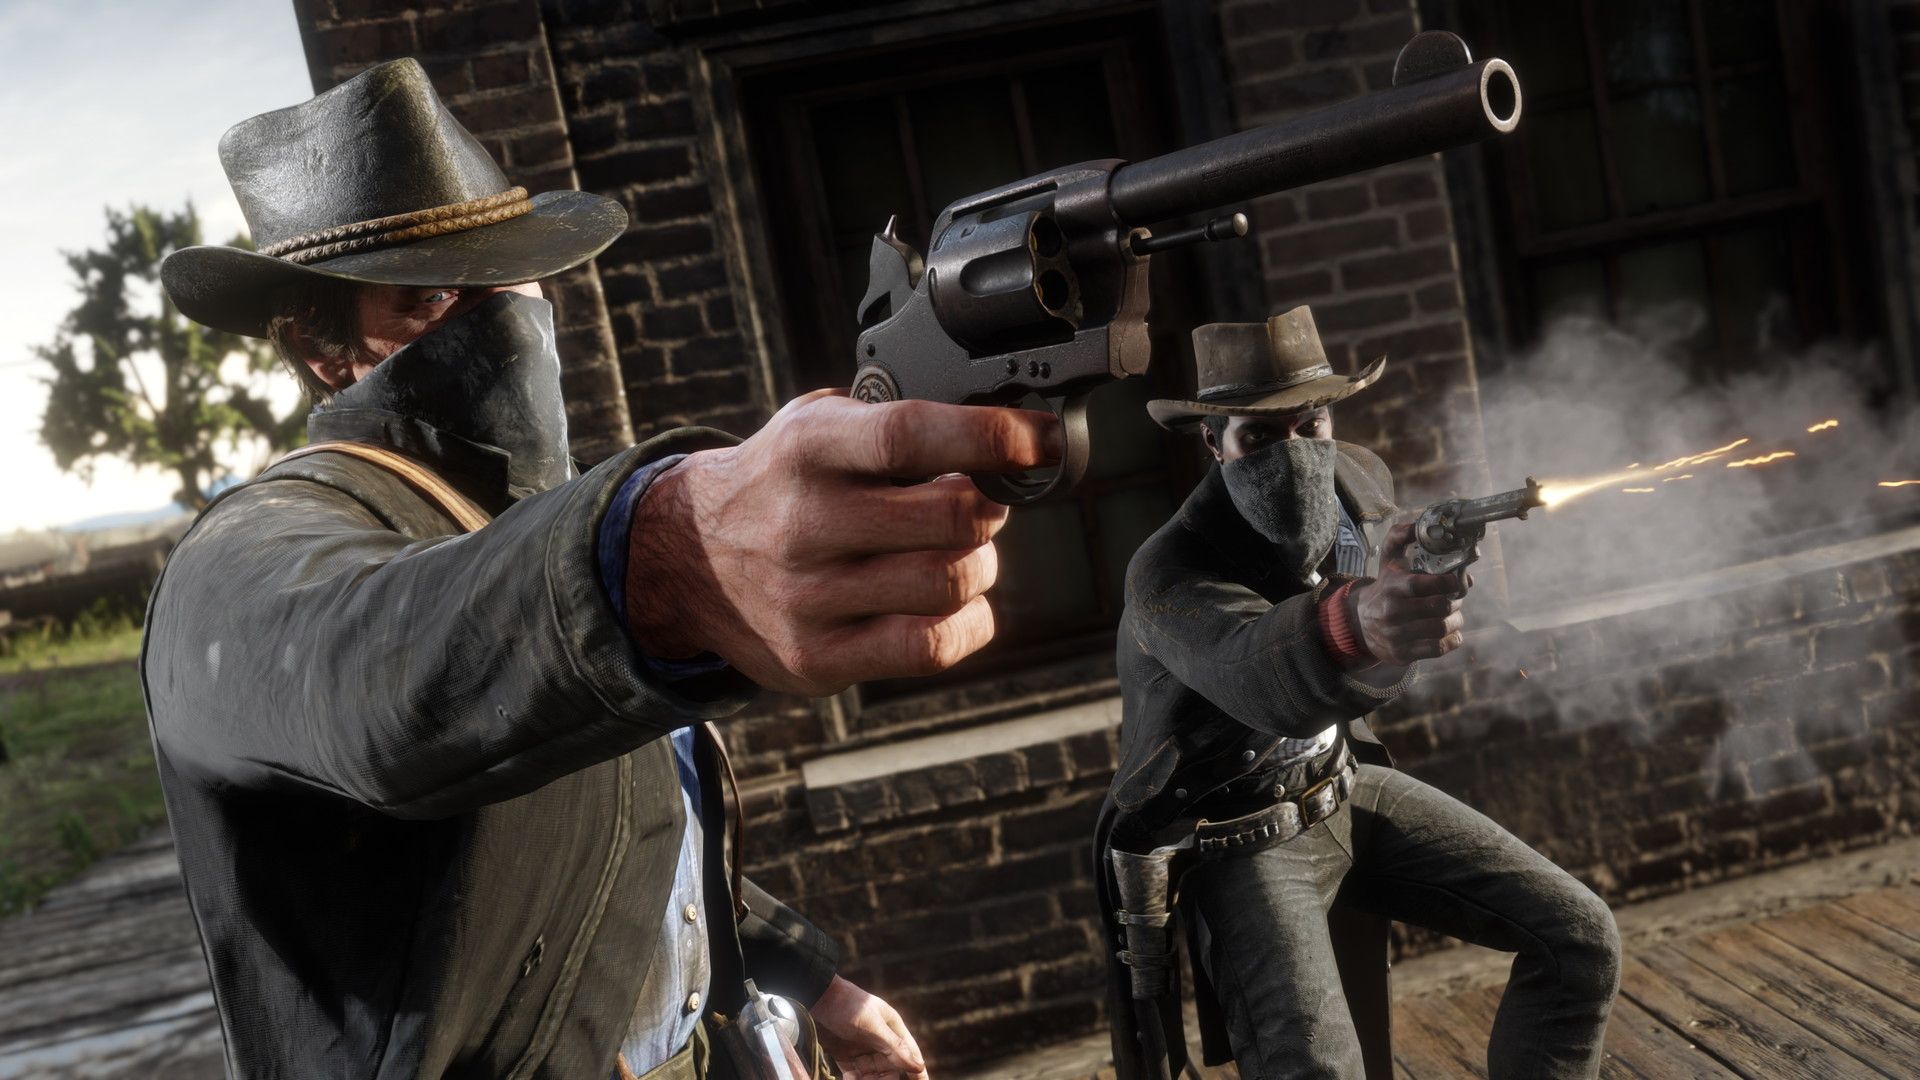 Today, we are going to be covering the Red Dead Redemption 3 release date and rumors as the next installment to the franchise highly anticipated by fans.